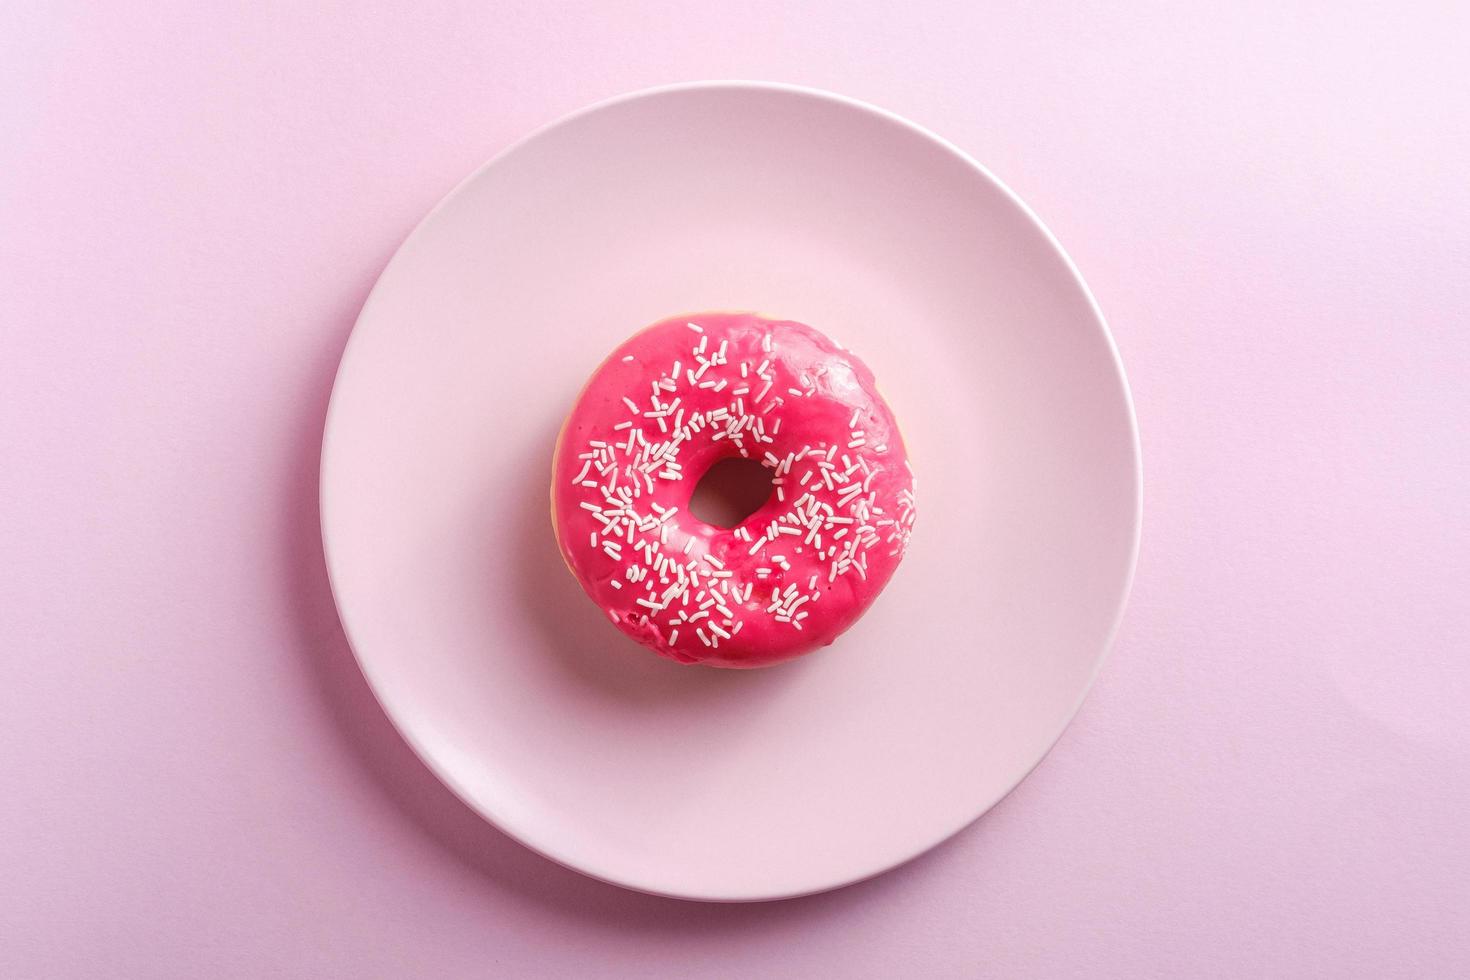 Bright pink donut with white sprinkles on pink plate photo